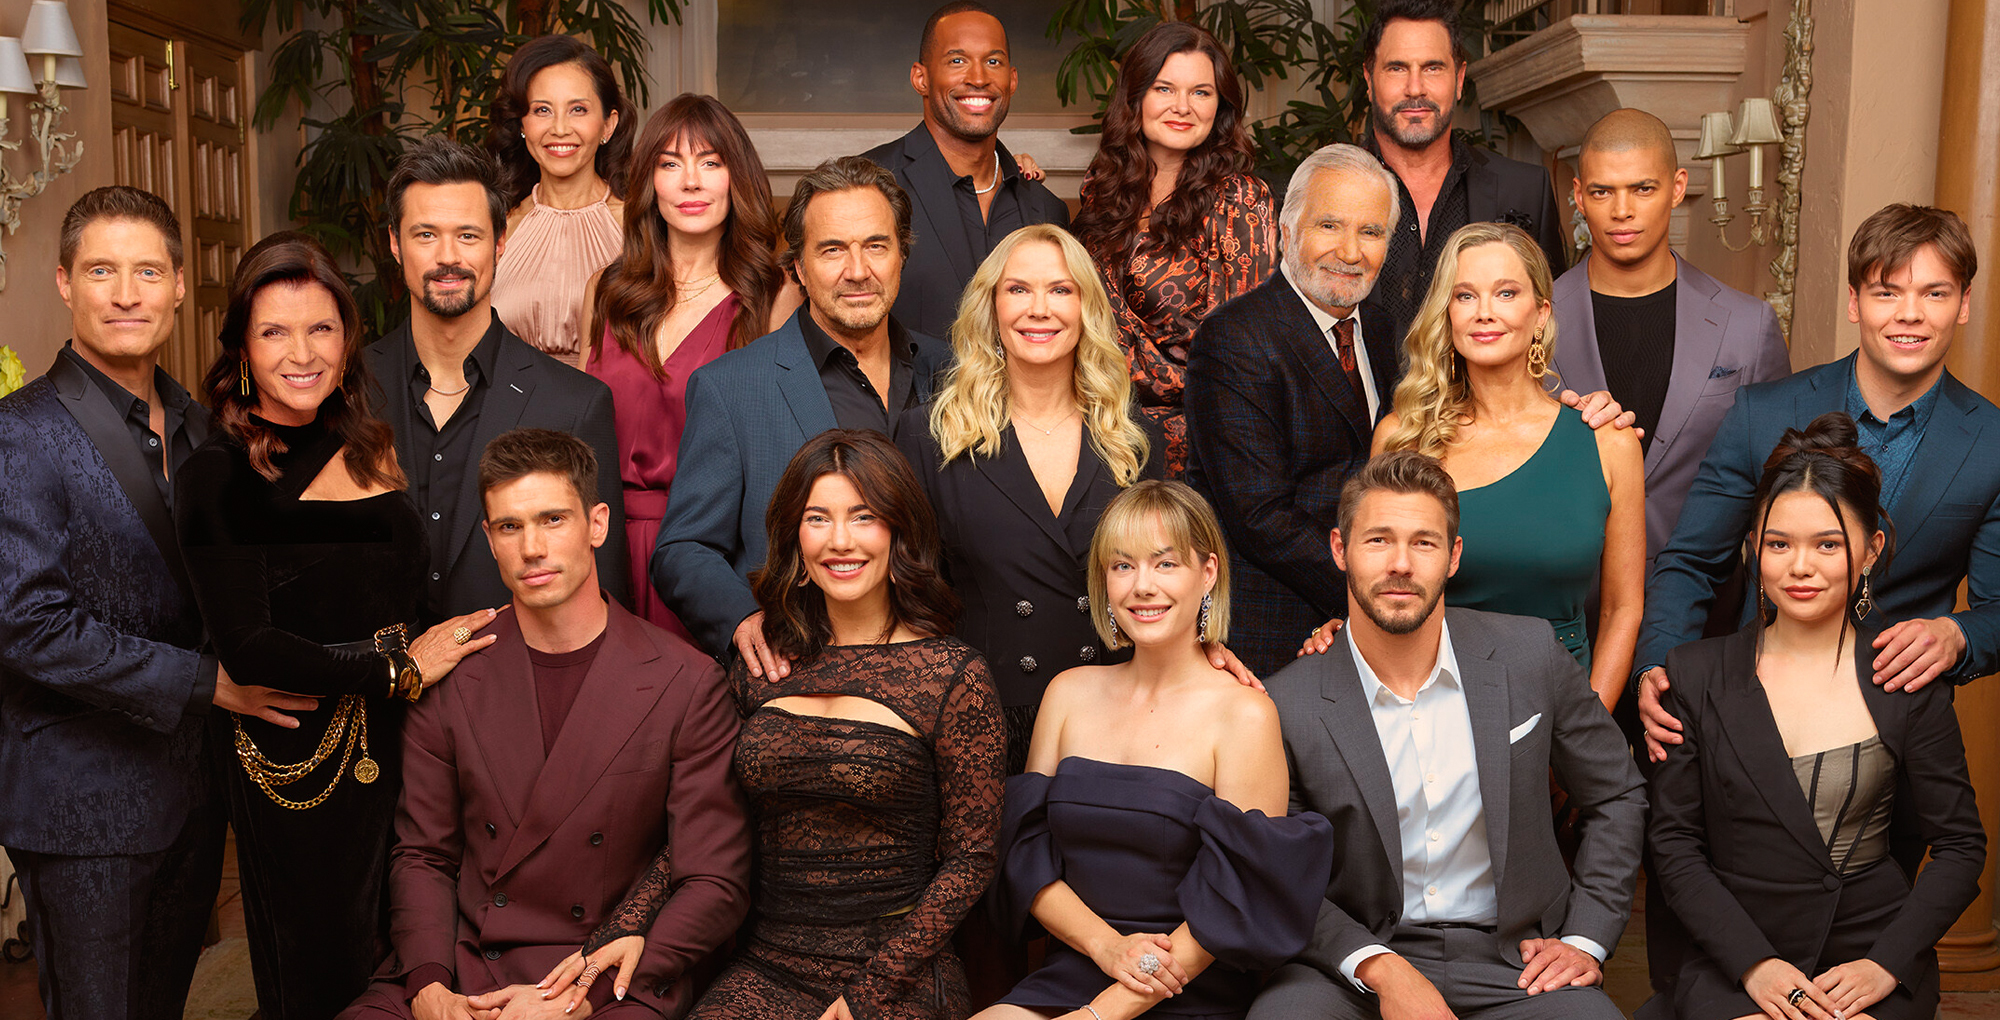 the bold and the beautiful cast.